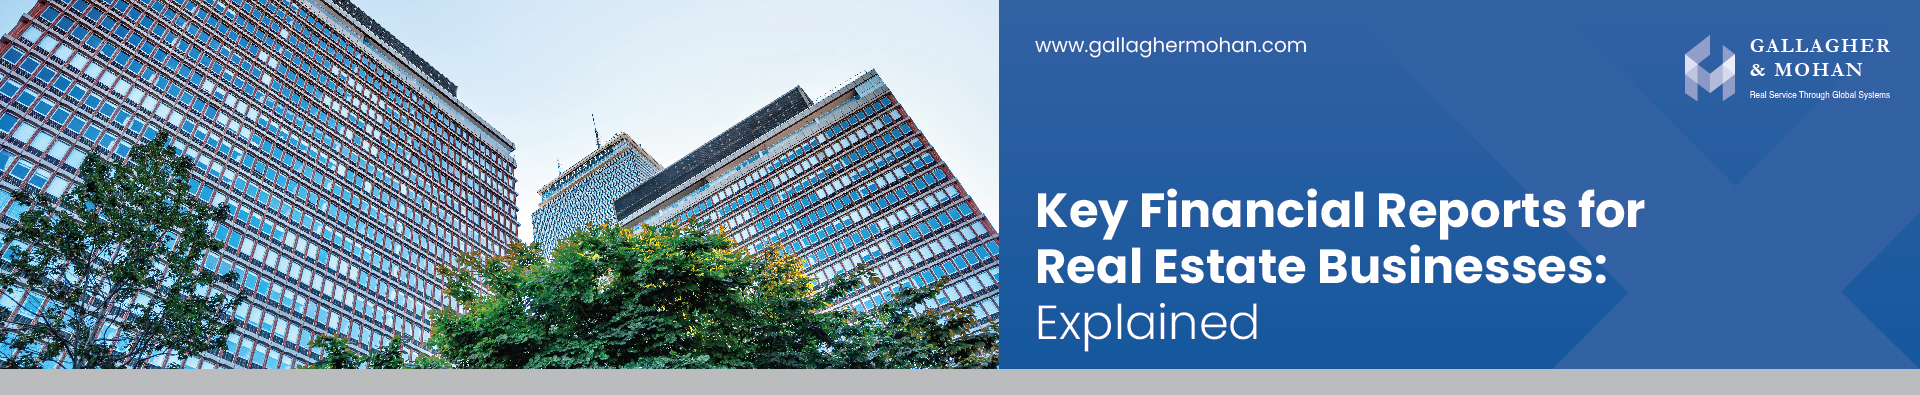 Key Financial Reports For Real Estate Businesses Explained